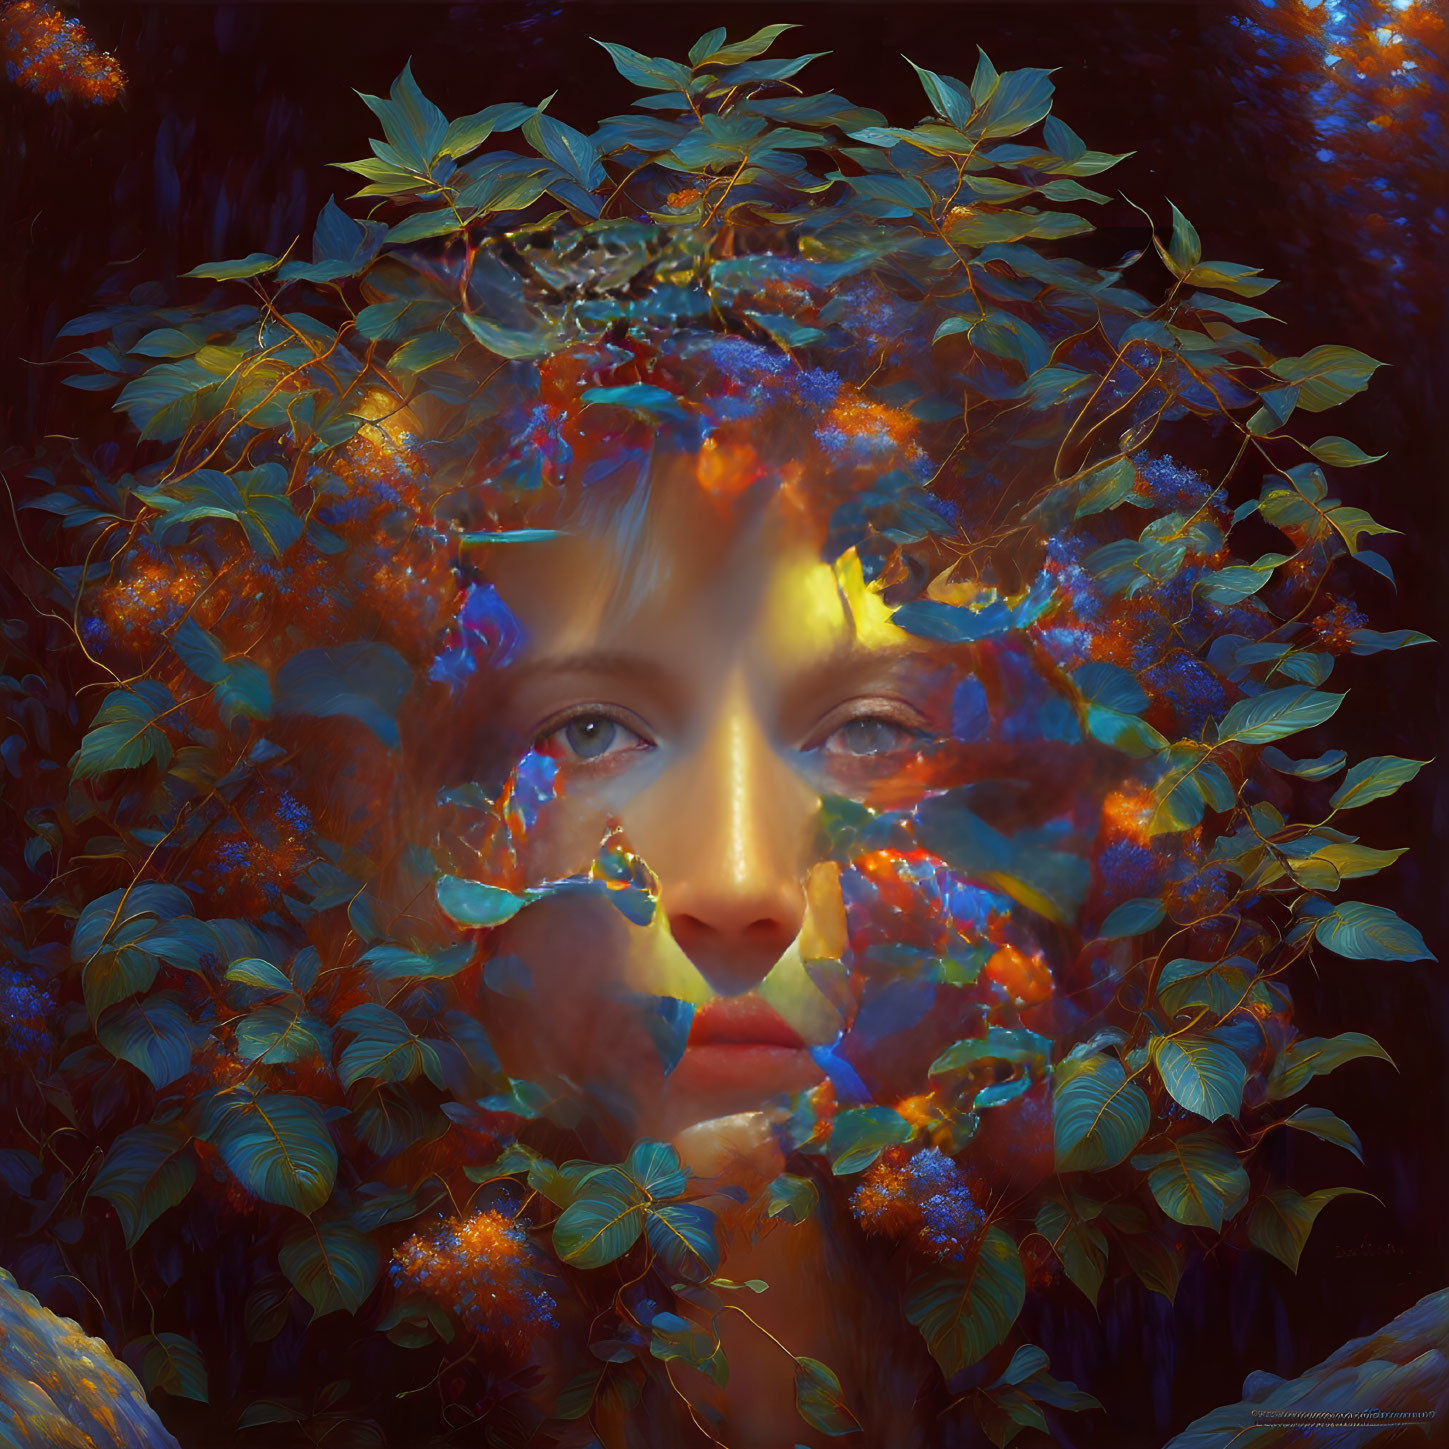 Woman's face in vibrant foliage and flowers: a surreal composition